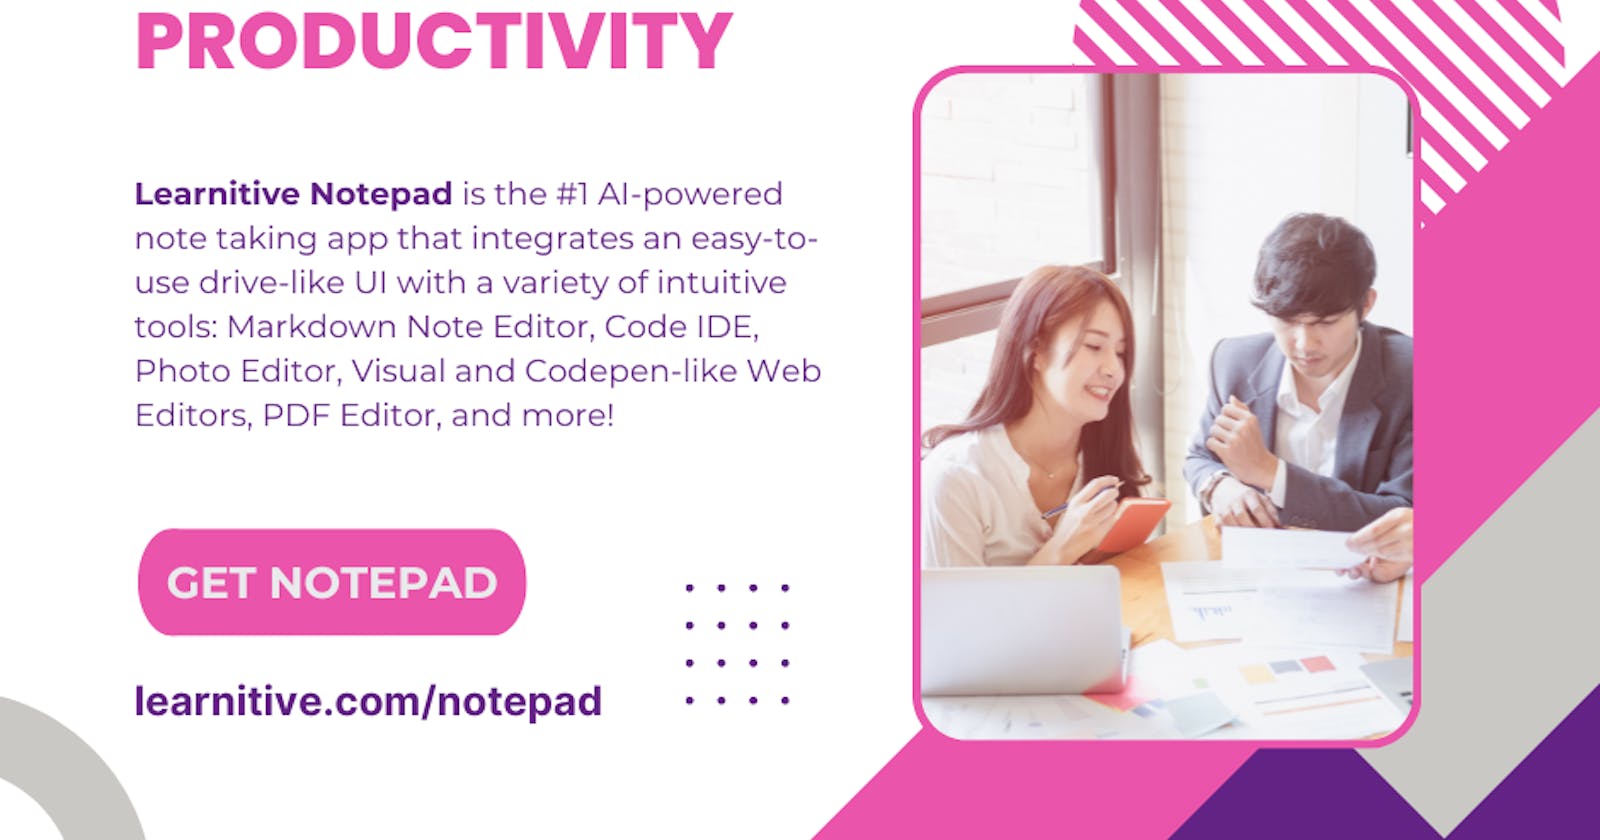 Learnitive Notepad: The Ultimate All-in-One Note Taking App